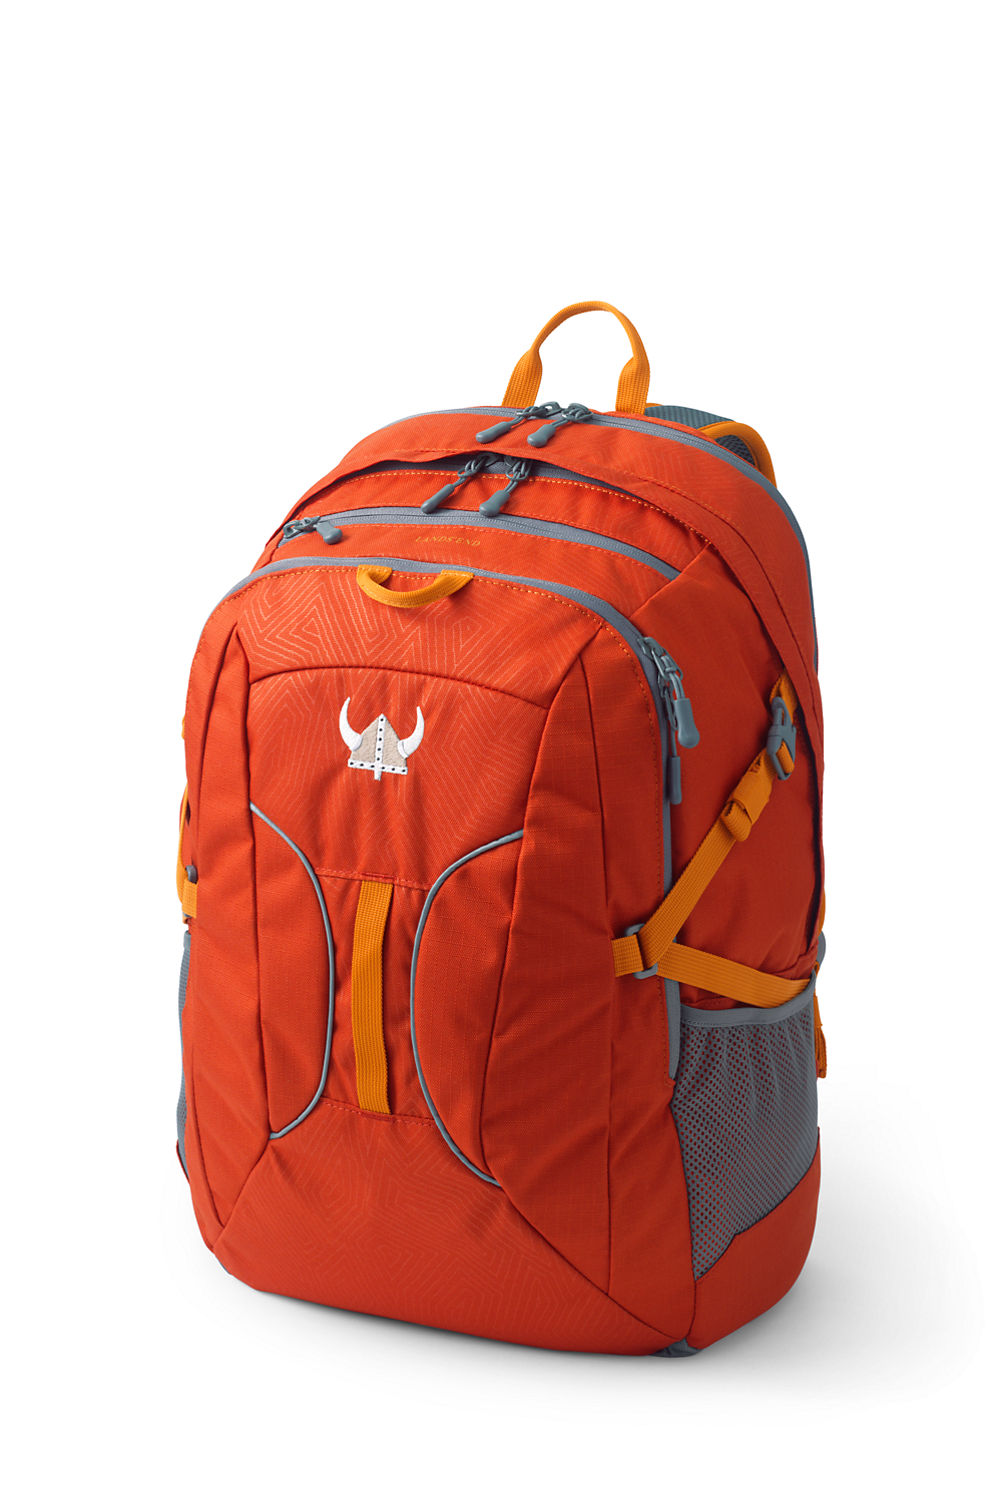 Good Backpacks For Middle Schoolers